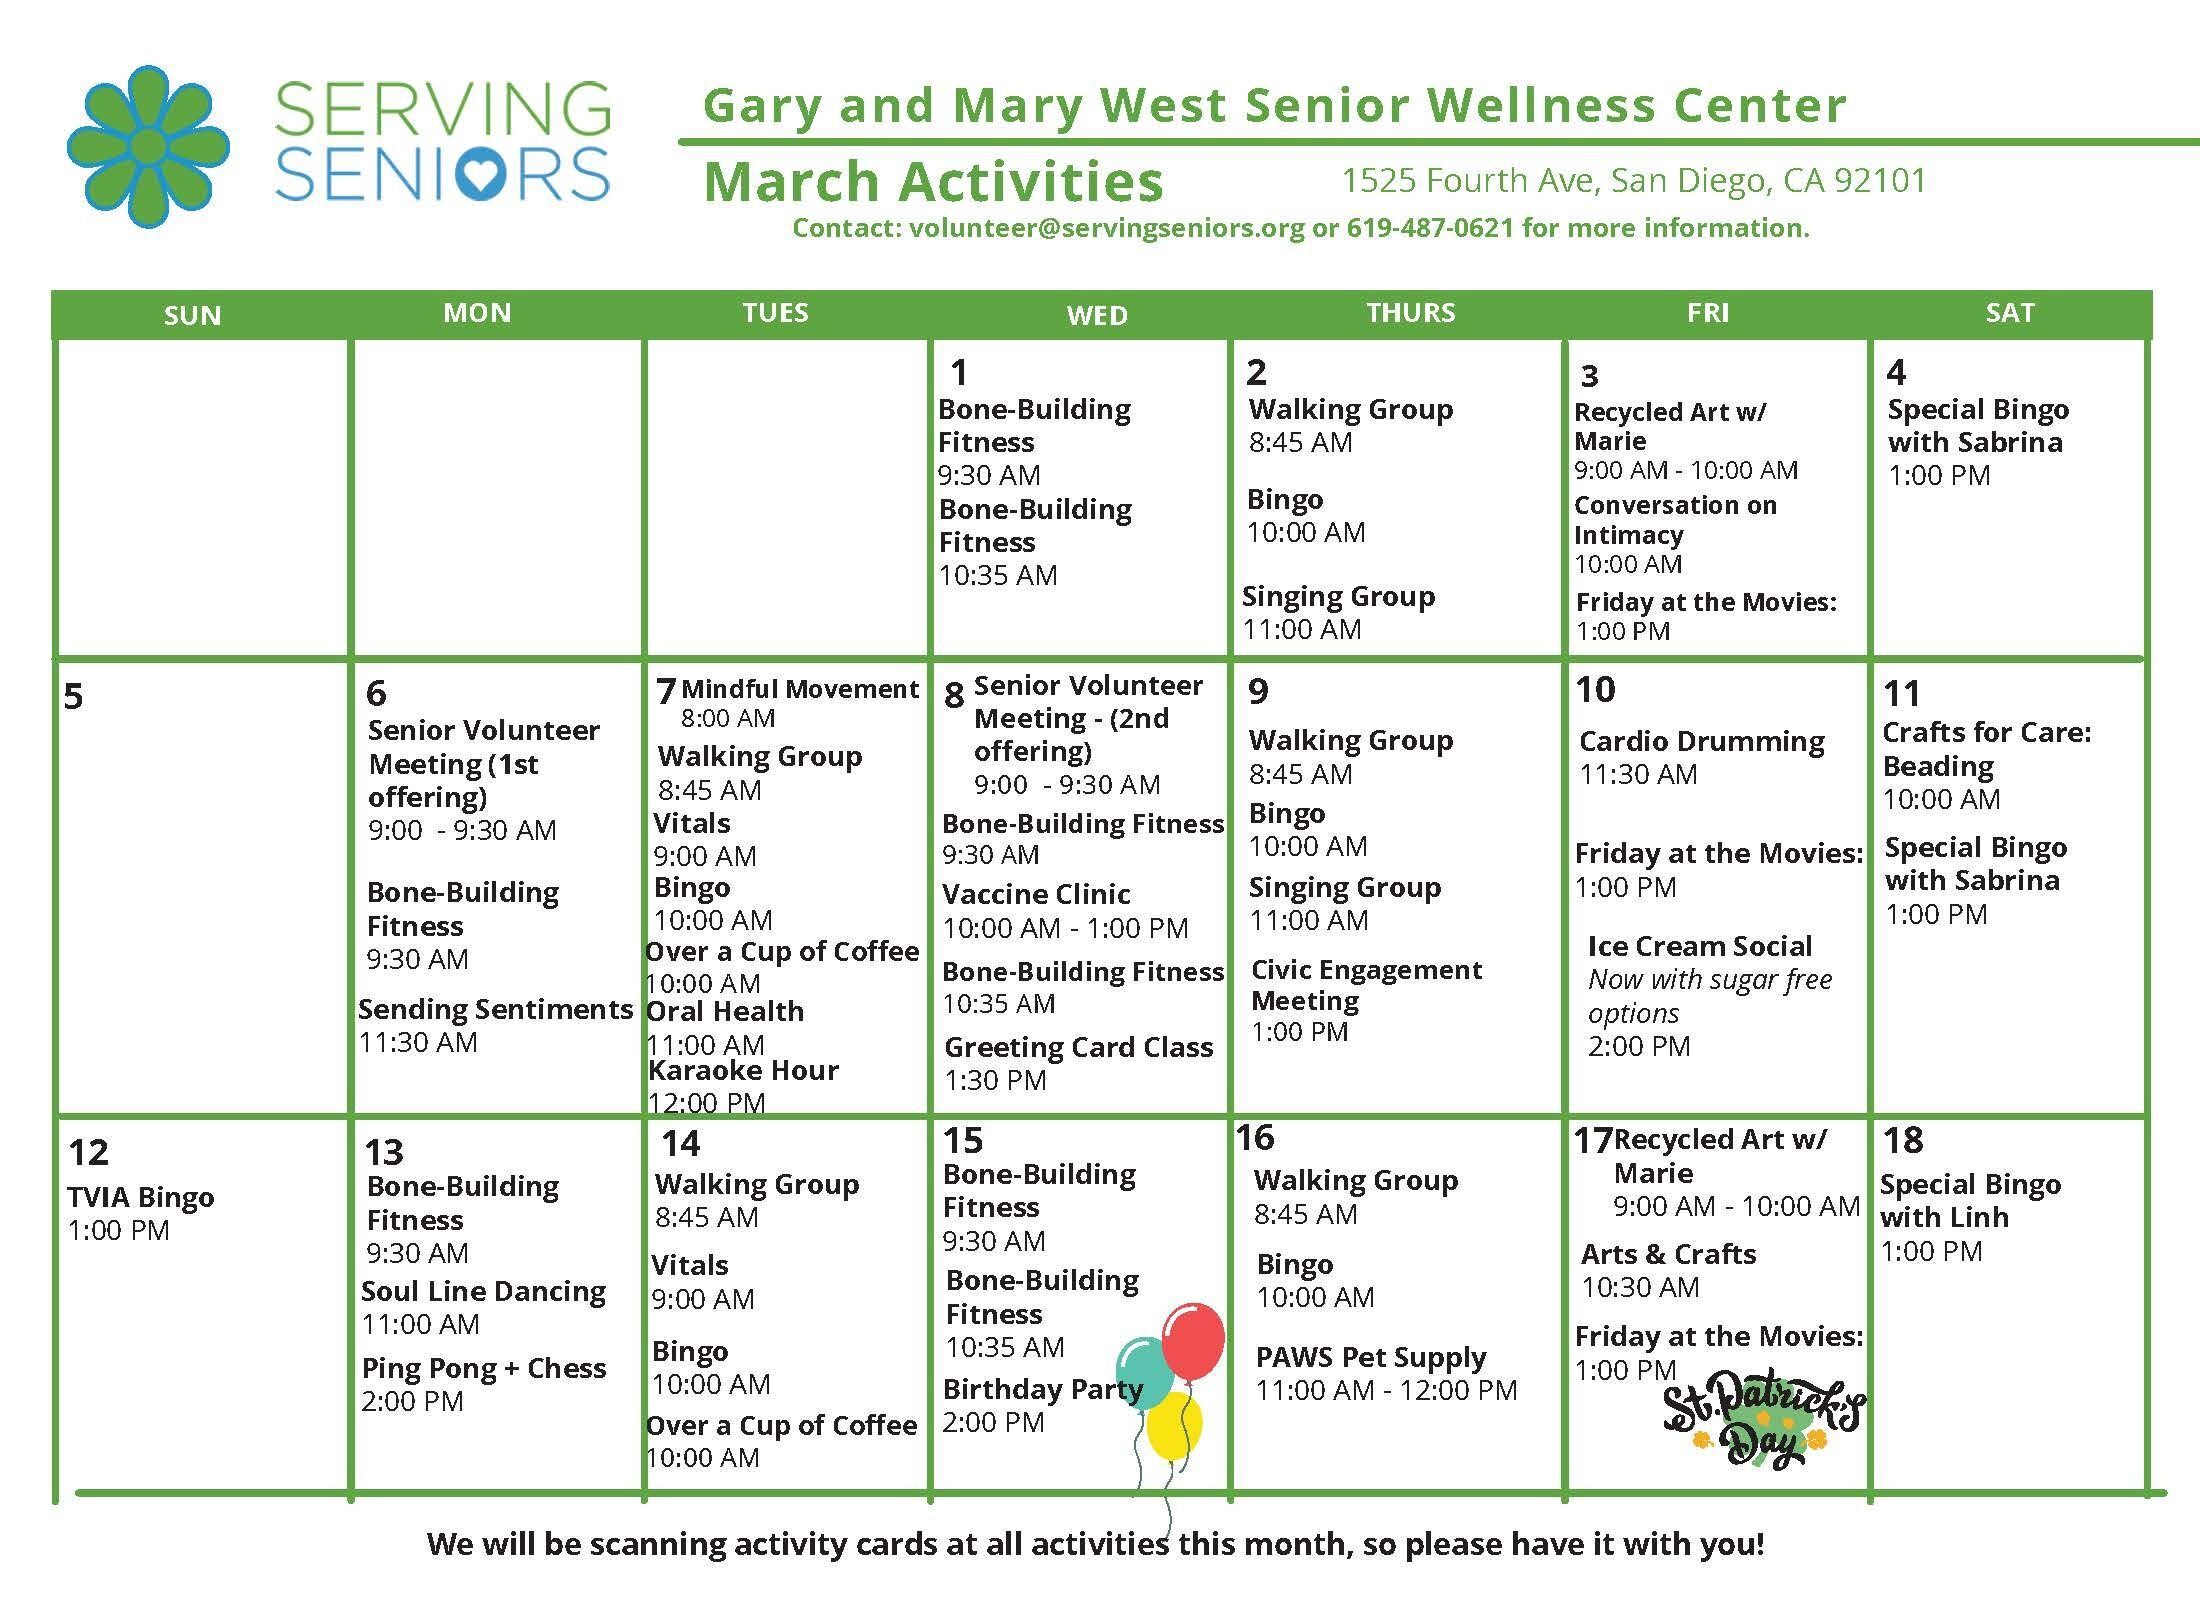 Click to download the Gary and Mary West Senior Wellness Center March Activities Calendar